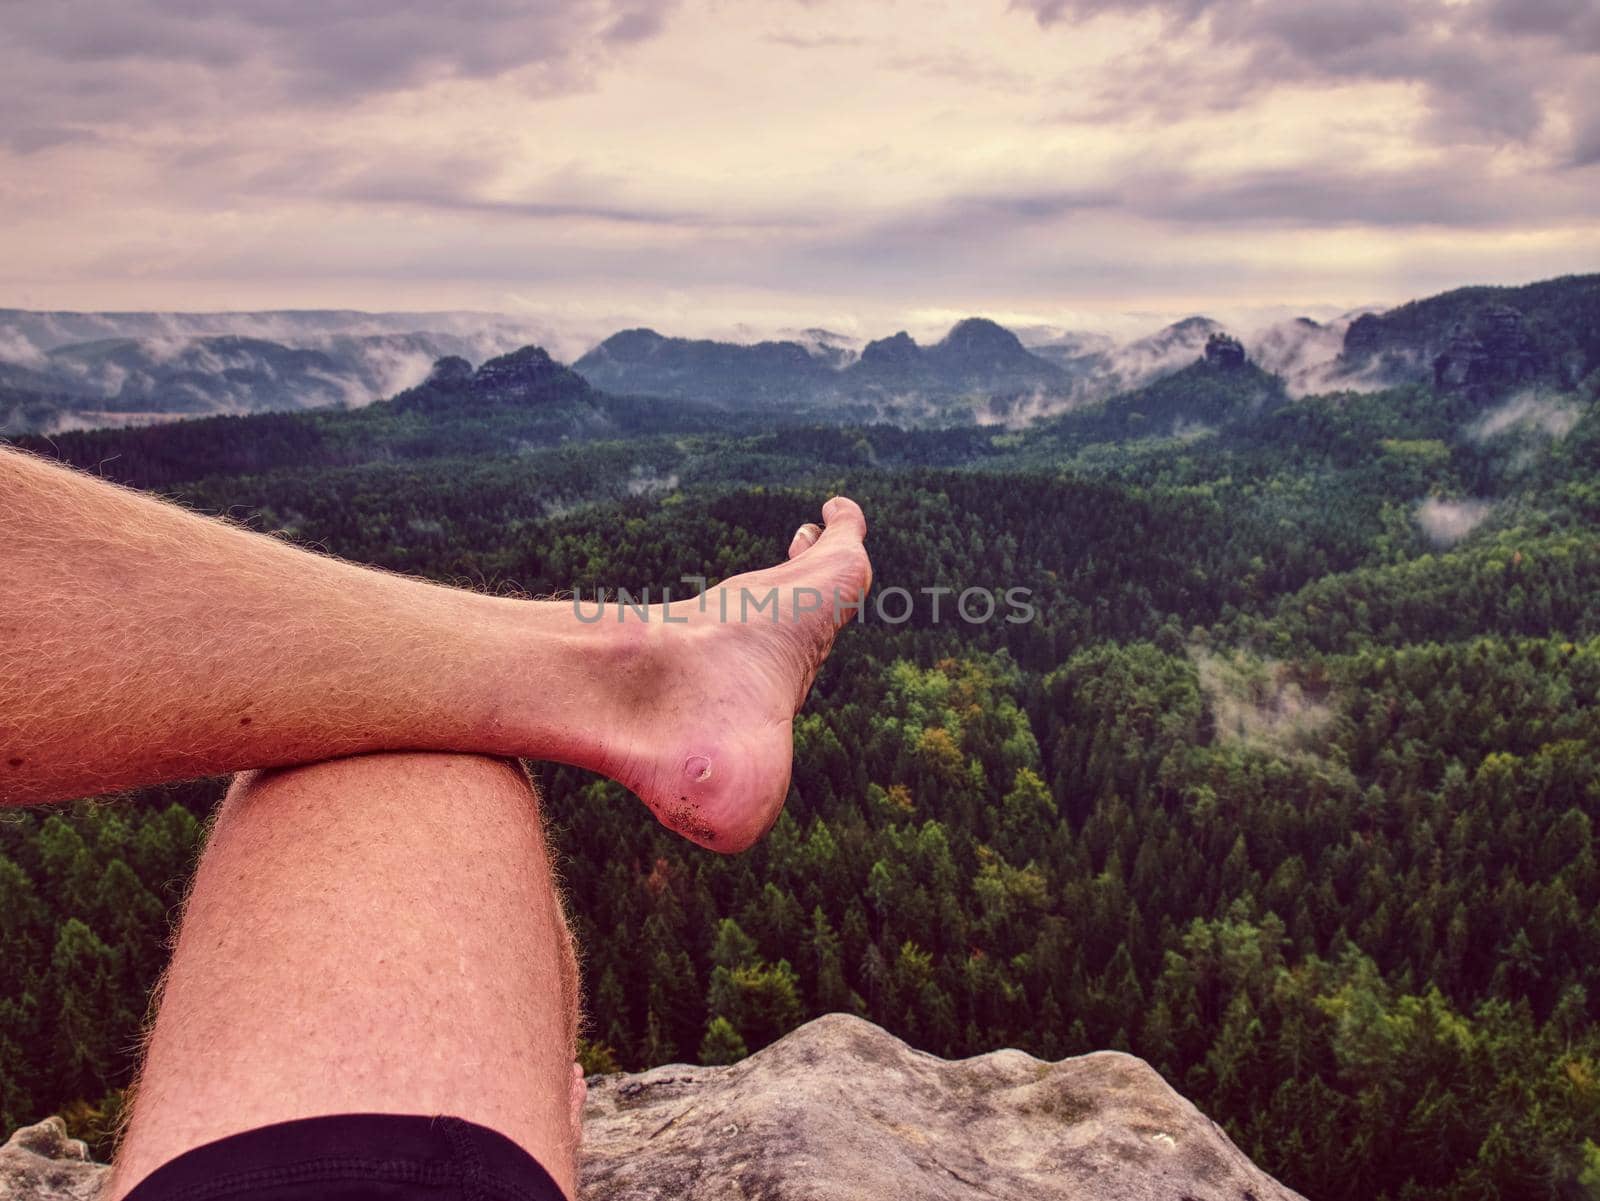 First person perspective shot from hiker sit at edge of cliff above rain forest valley